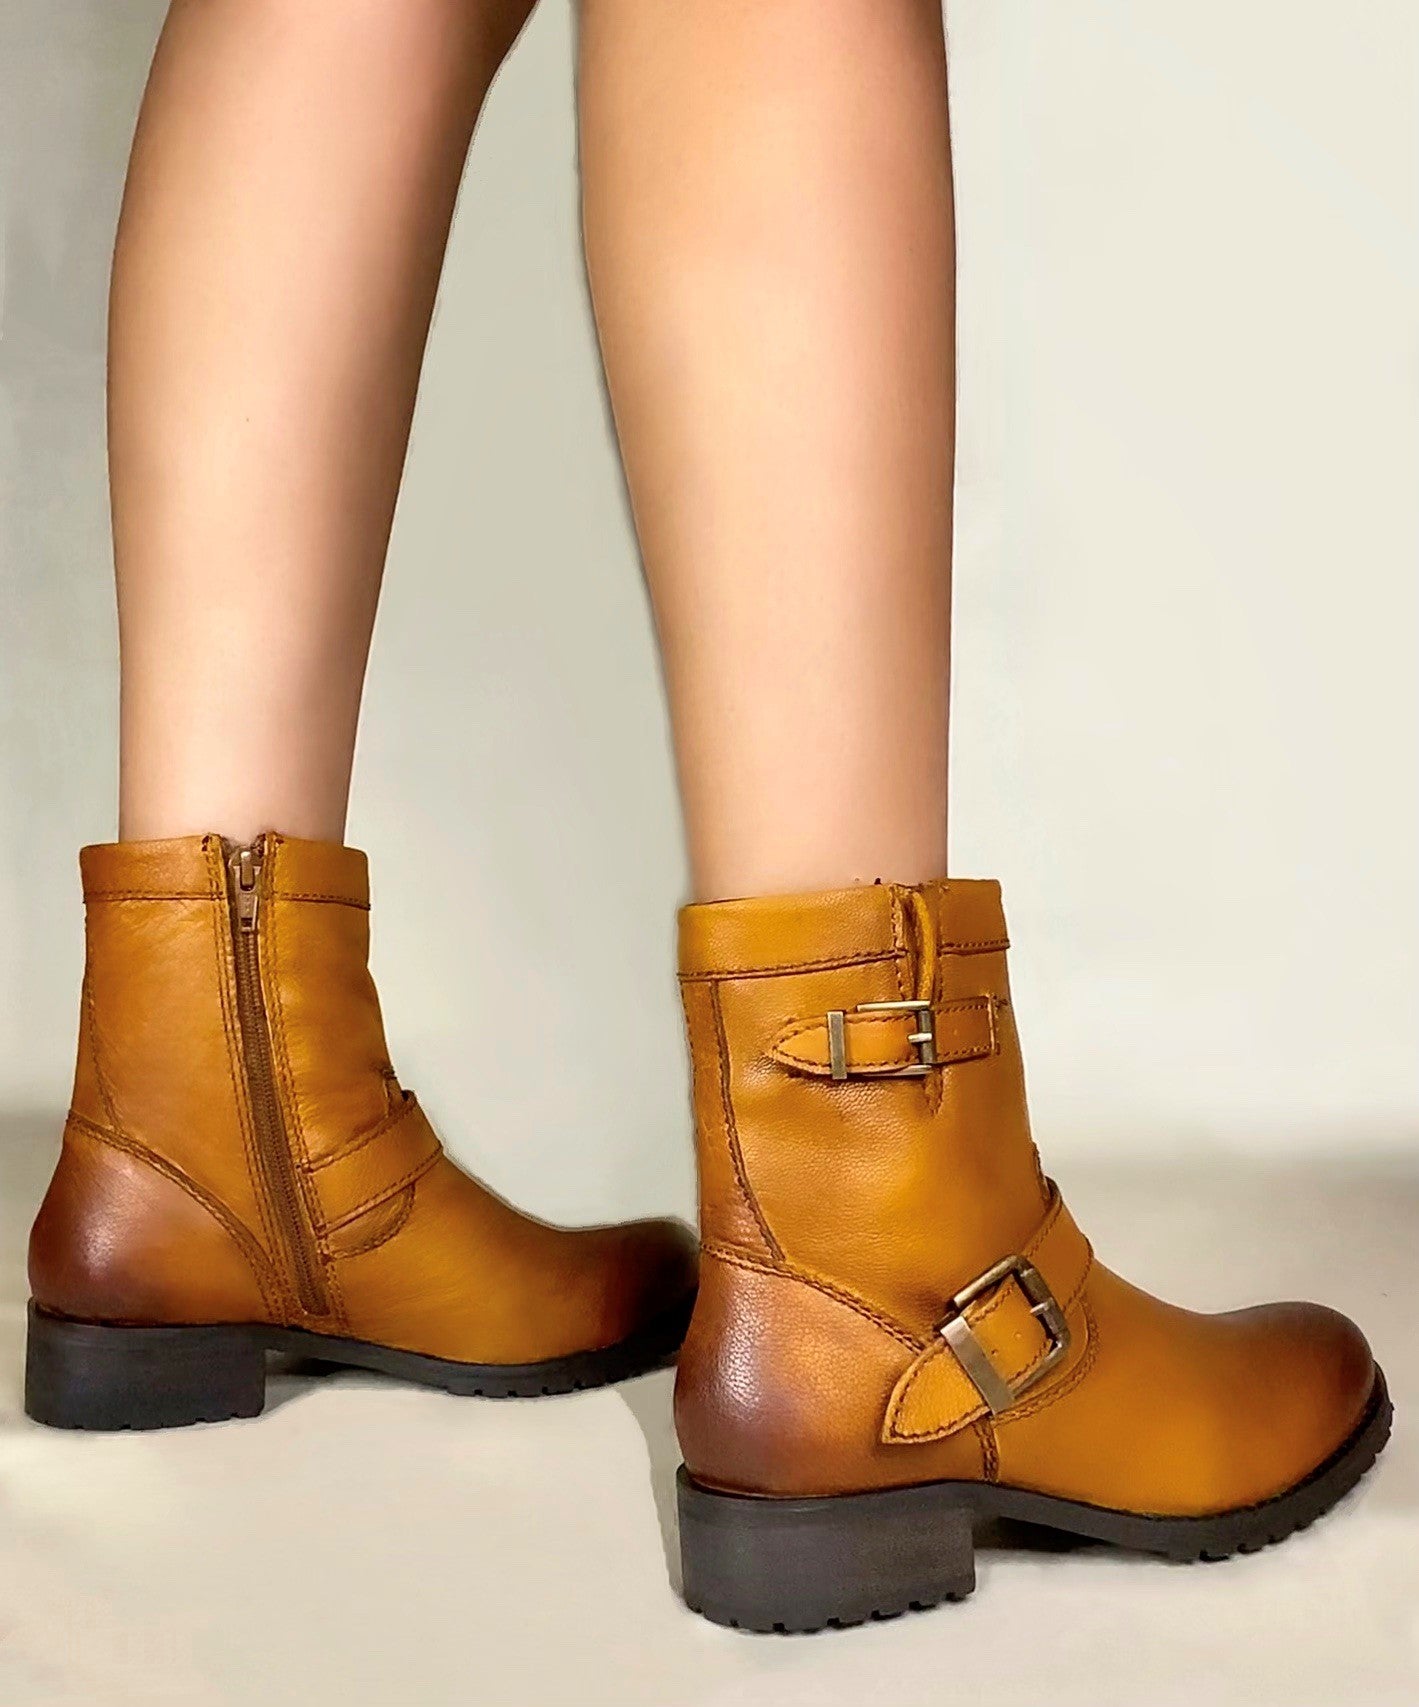 Buckled Strap Short Riding Boots